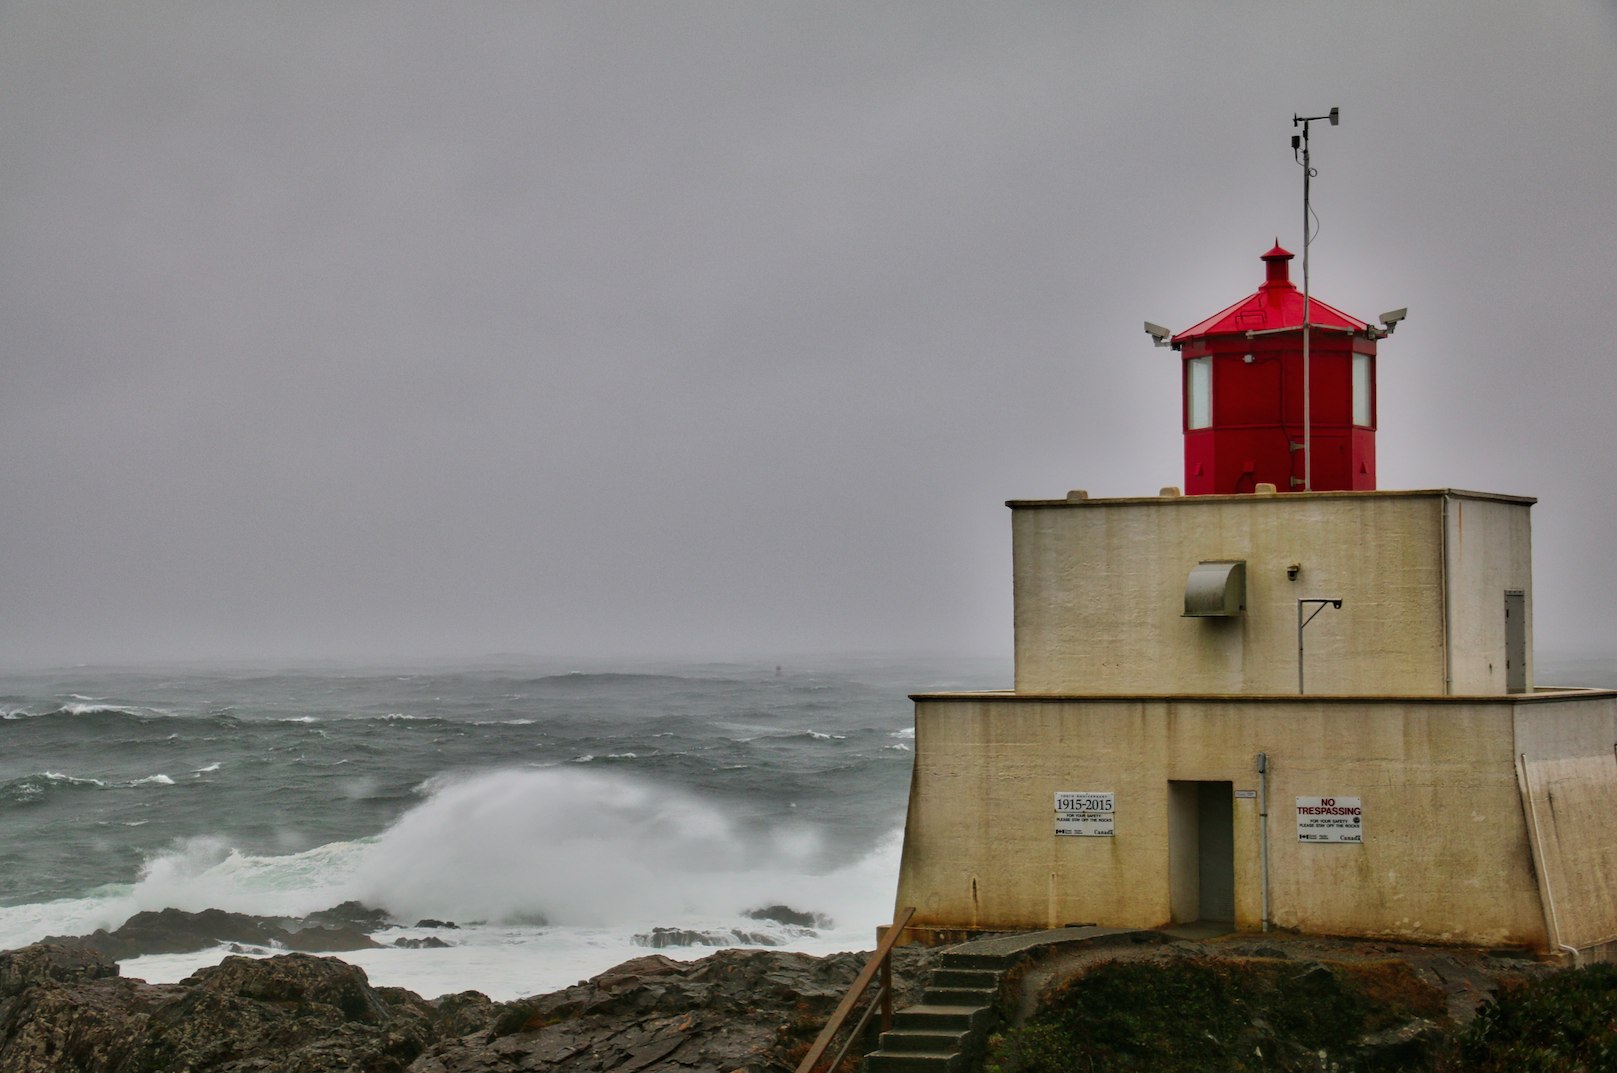 Amphritrite Lighthouse, Ucluelet, Vancouver Island, BC